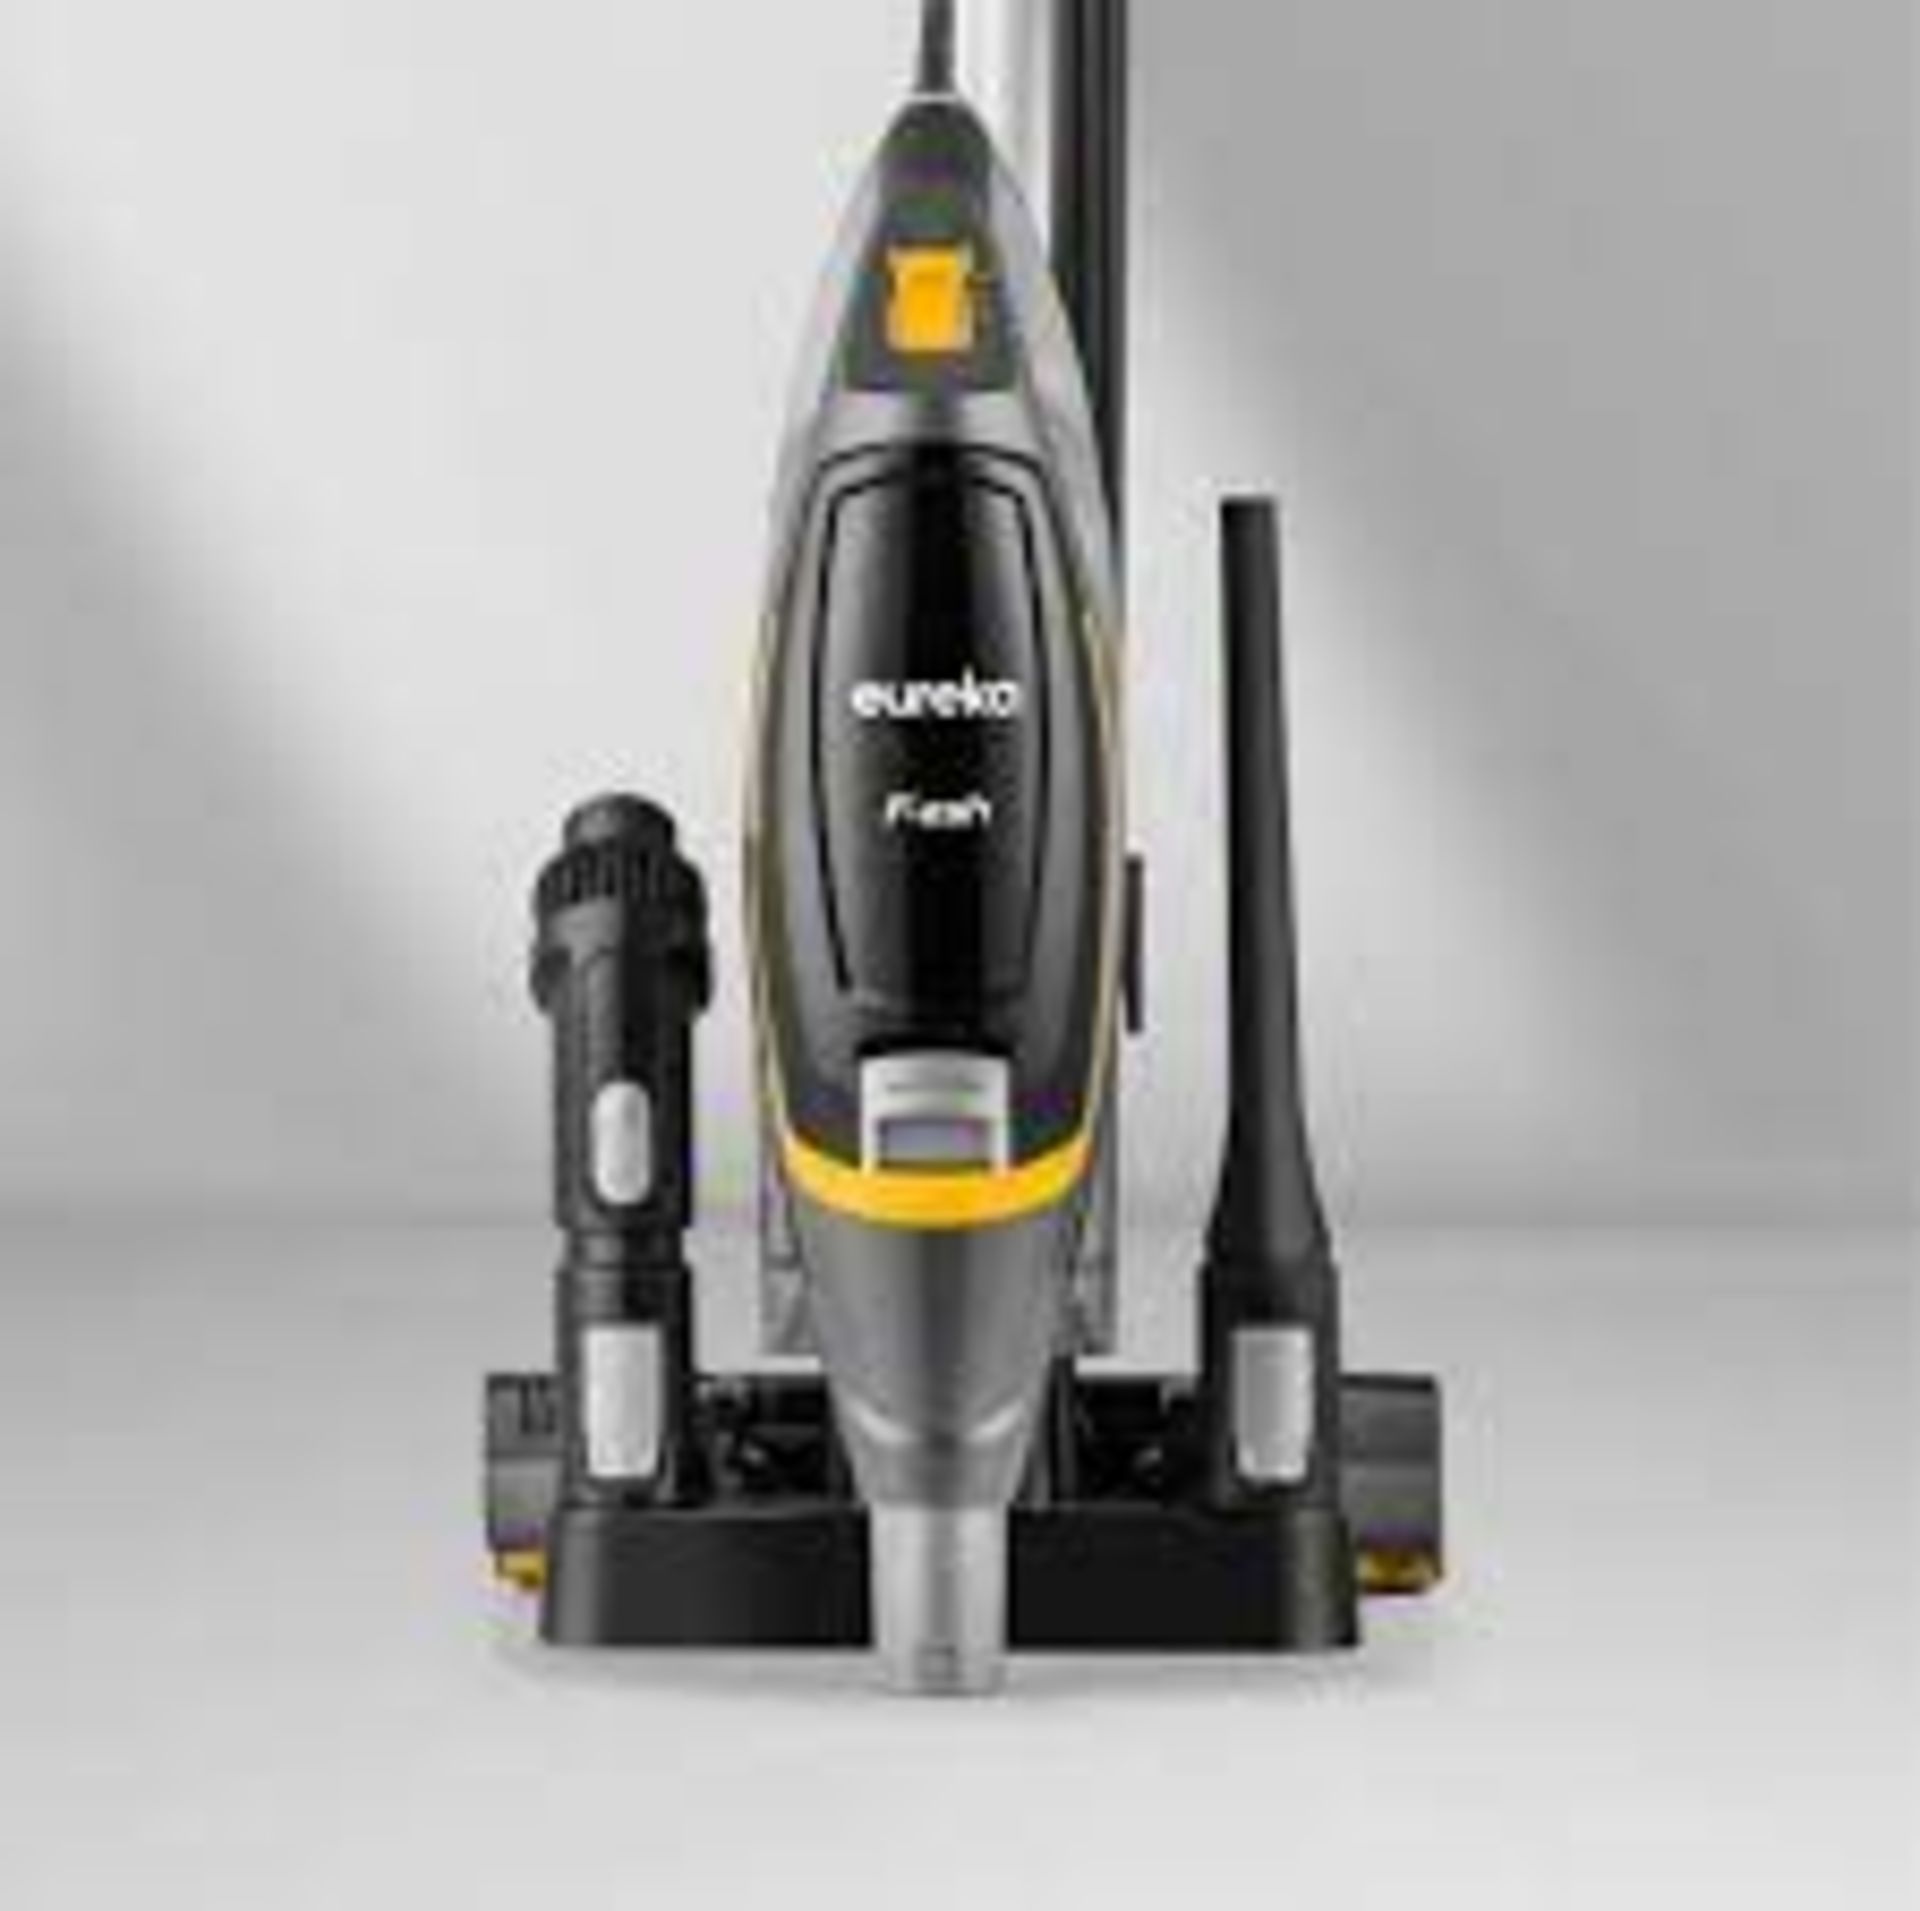 6 X BRAND NEW Eureka NES510 2-in-1 Corded Stick & Handheld Vacuum Cleaner, 400W Motor for Whole - Image 3 of 3